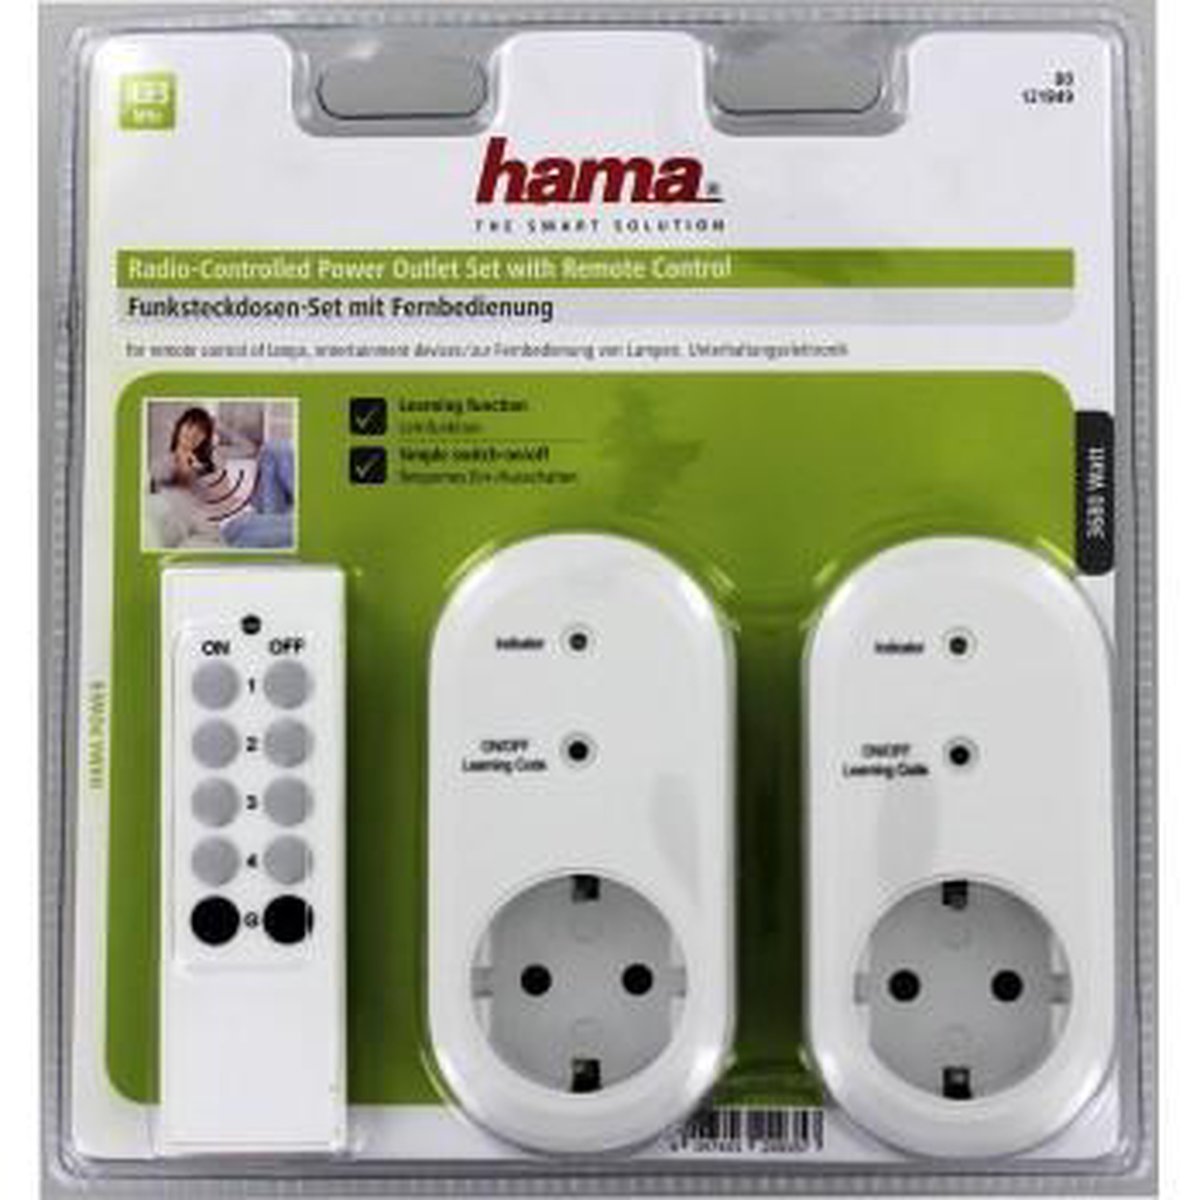 Hama Radio-Controlled Power Outlet Set With Remote Control | bol.com